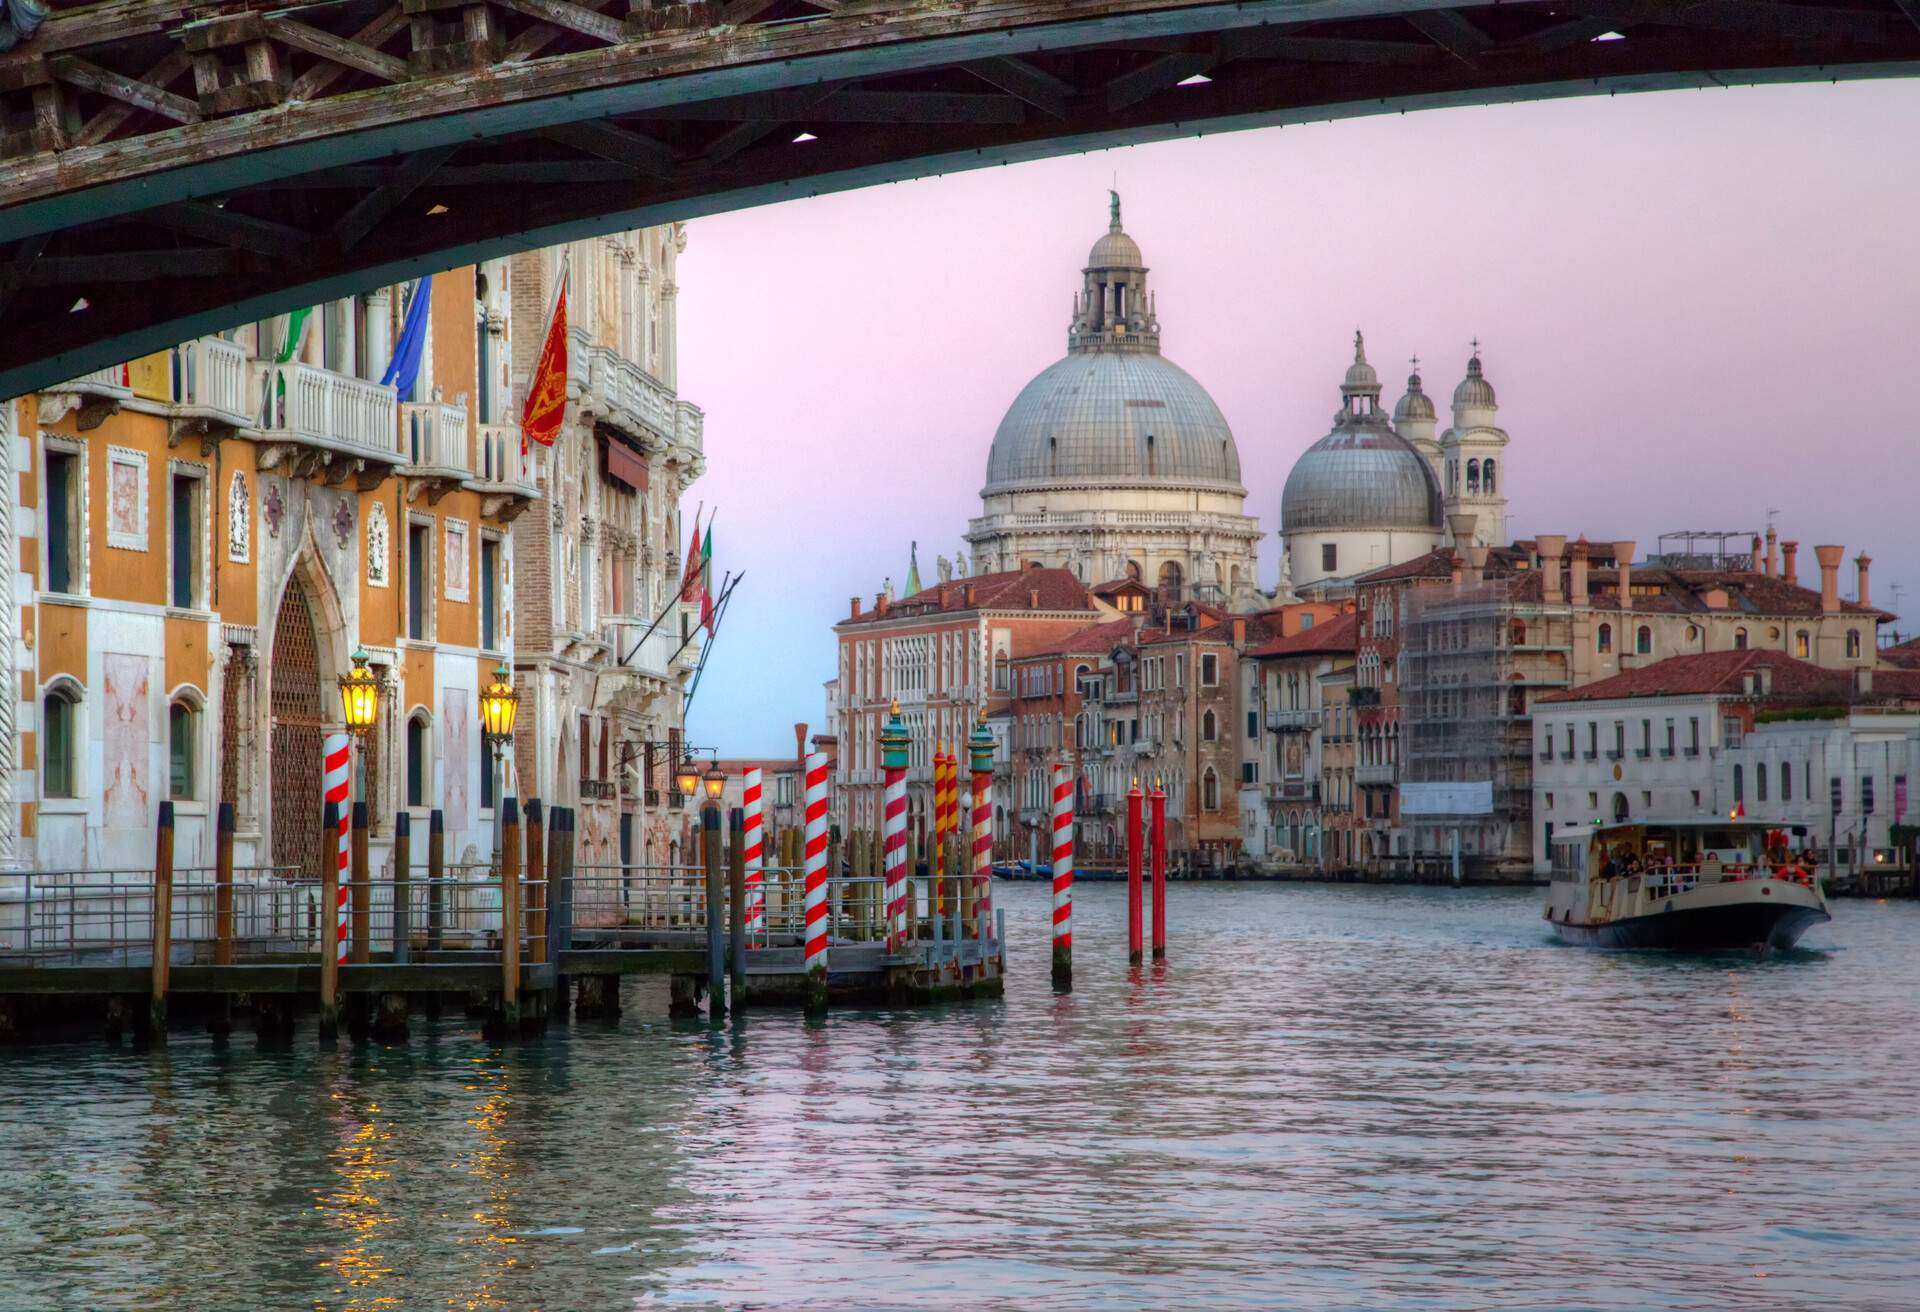 DEST_ITALY_VENICE_ACADEMY_BRIDGE_GRAND_CANAL_GettyImages-484070497